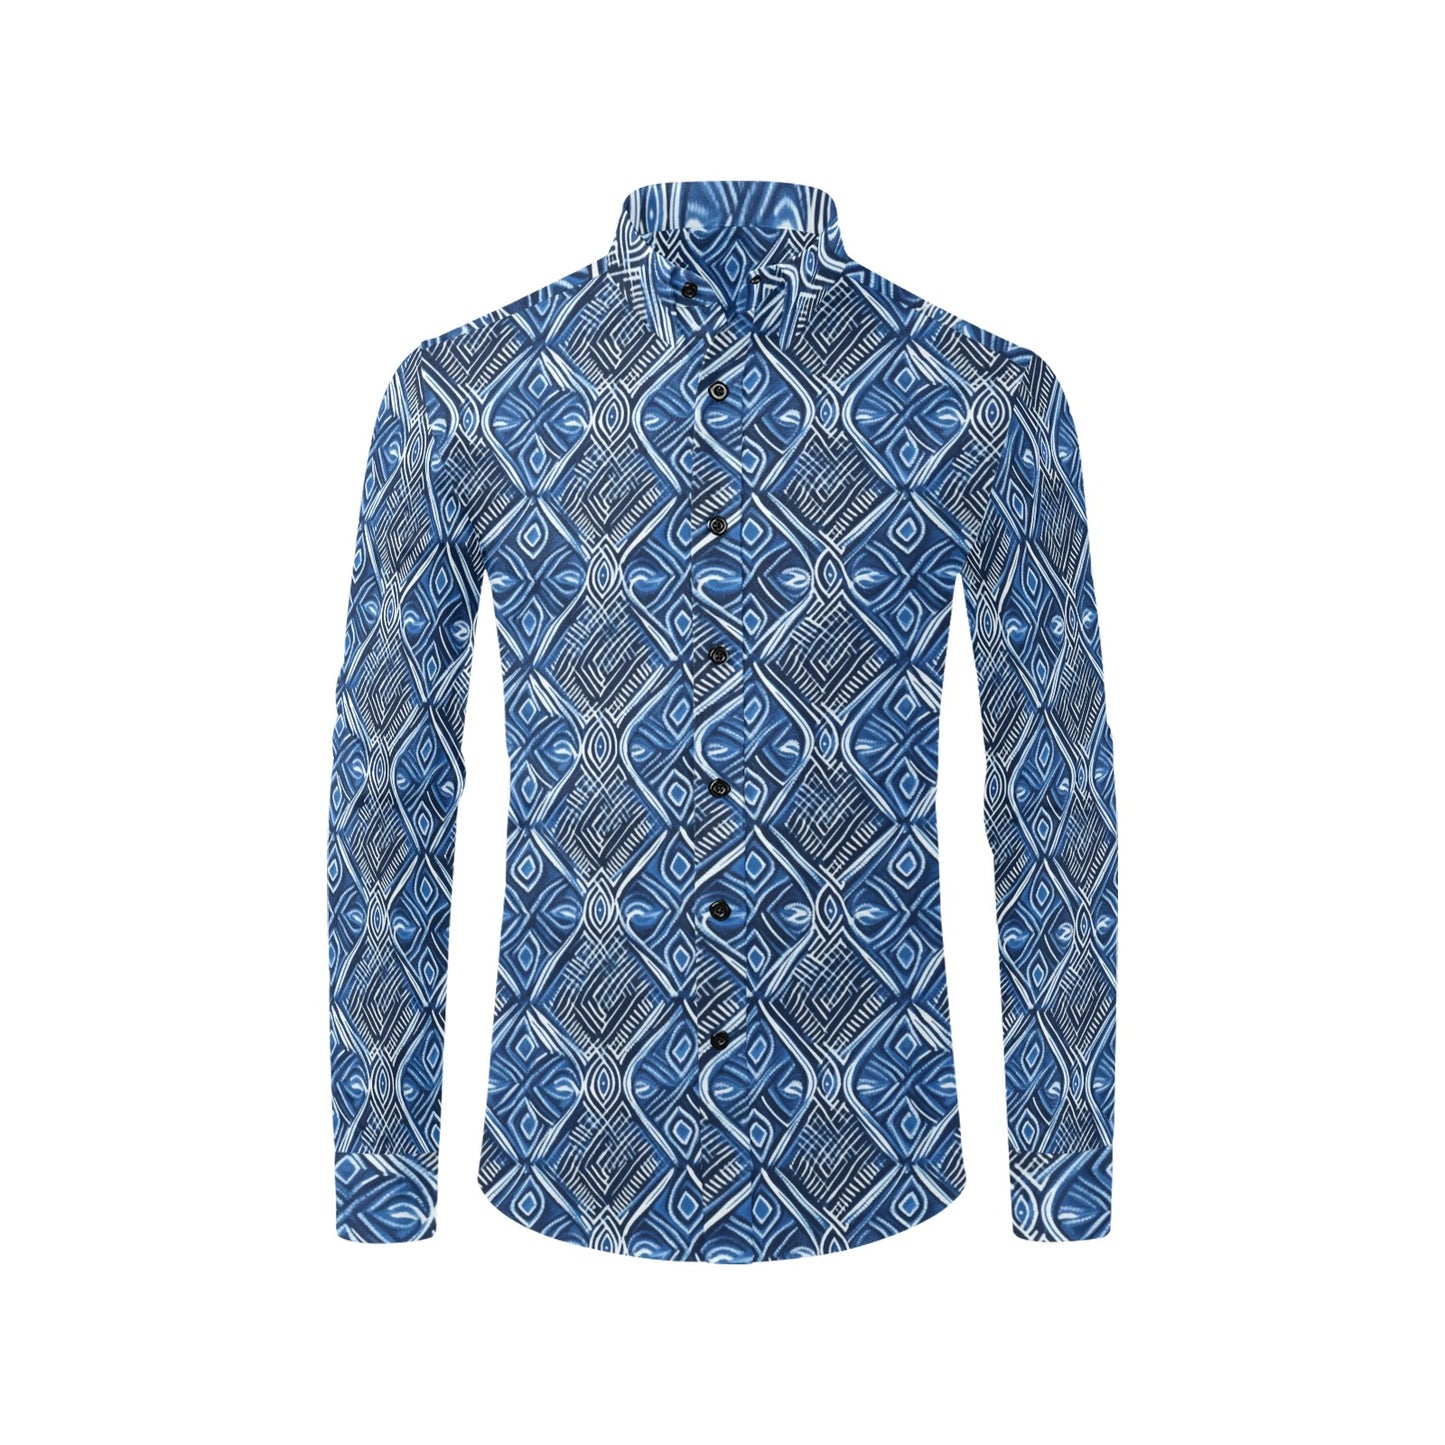 Indigo Blue Adire Long Sleeve Men Button Up Shirt, African Tie Dye Print Buttoned Collared Casual Dress Shirt with Chest Pocket Starcove Fashion